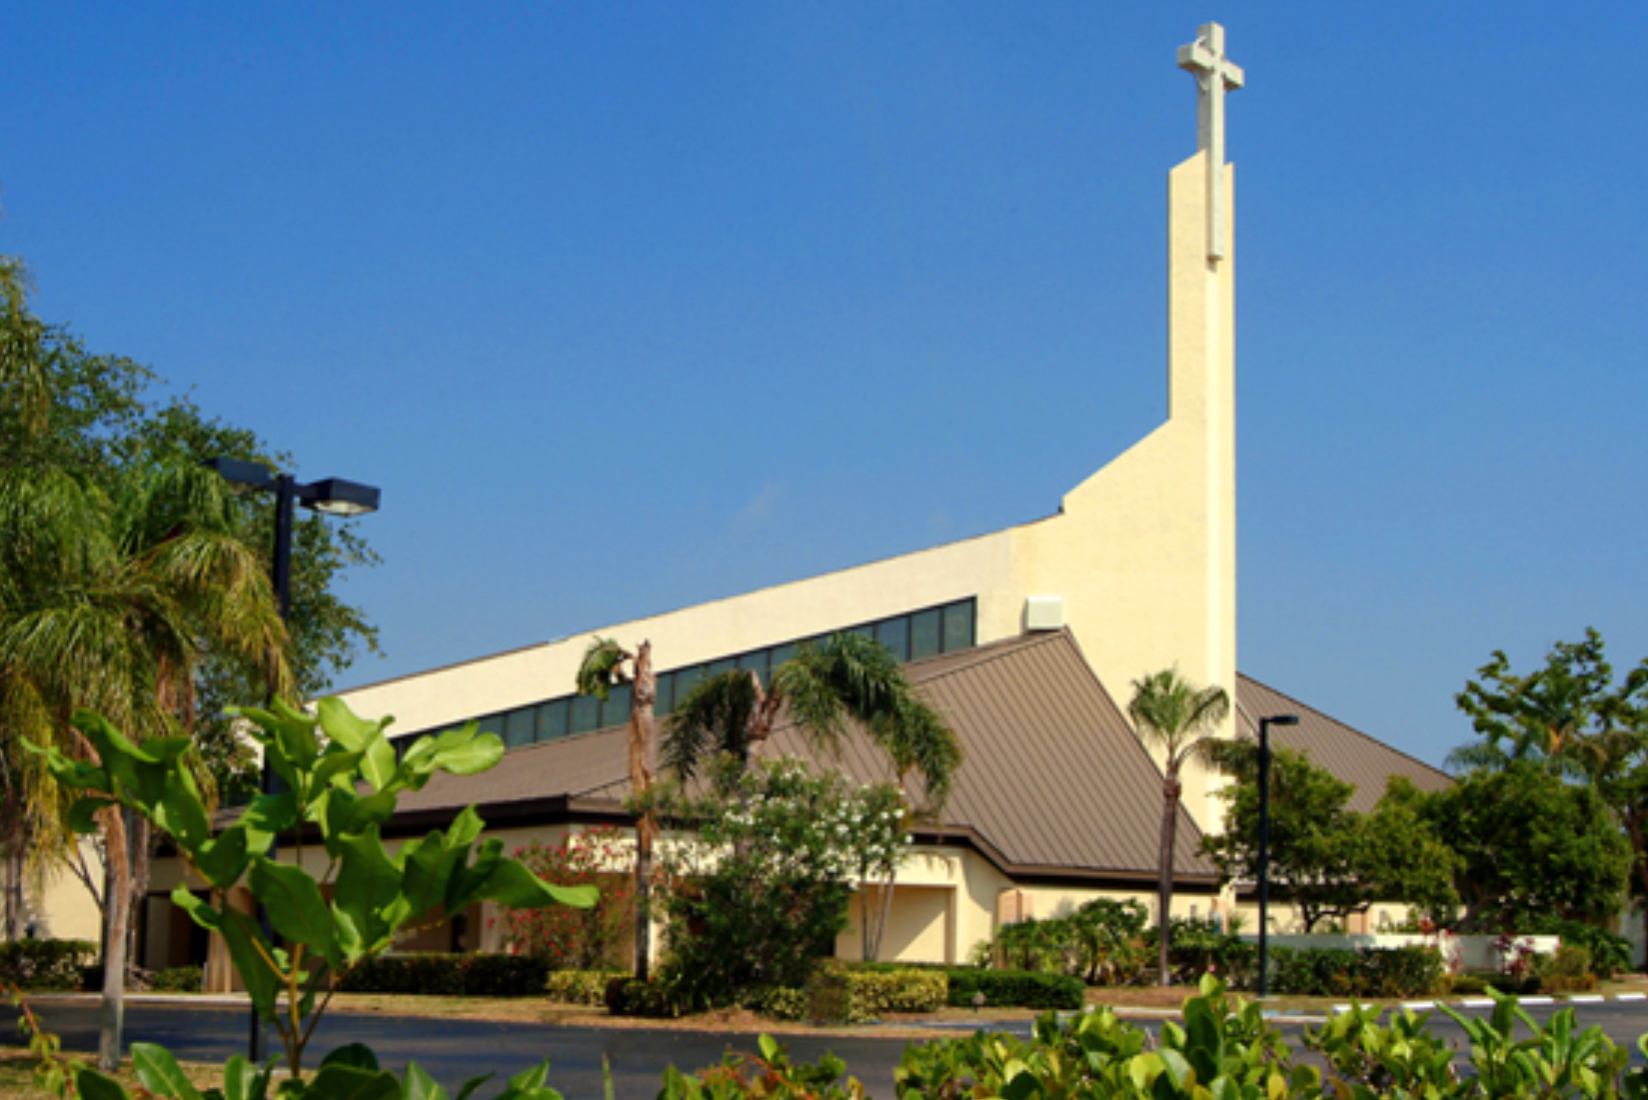 St Andrew Catholic Church in Coral Springs